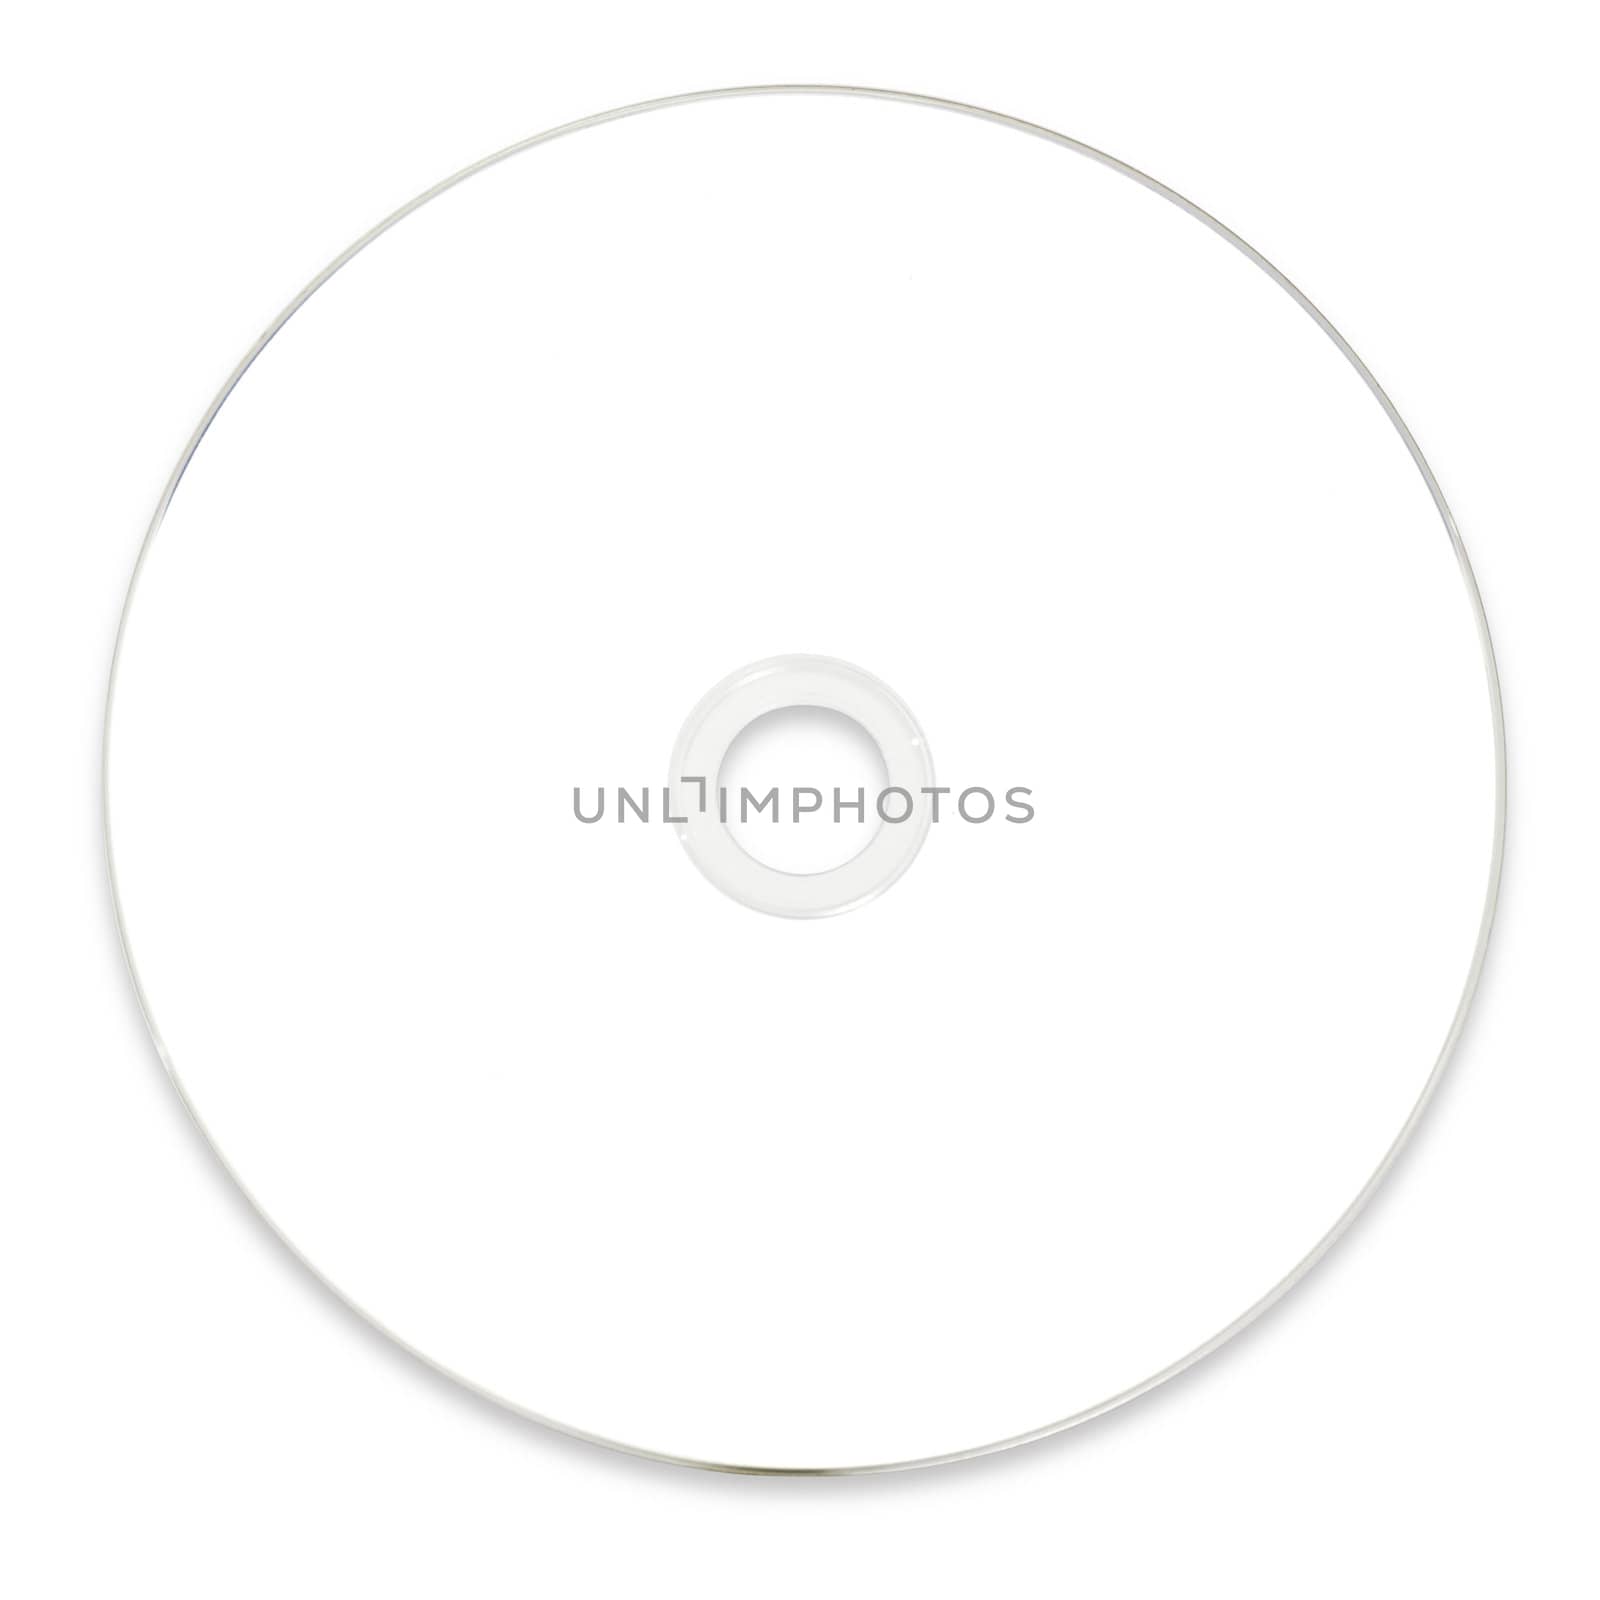 Blank white music compact disc or cd dvd vcd blueray  Ready for Your Own Graphics.